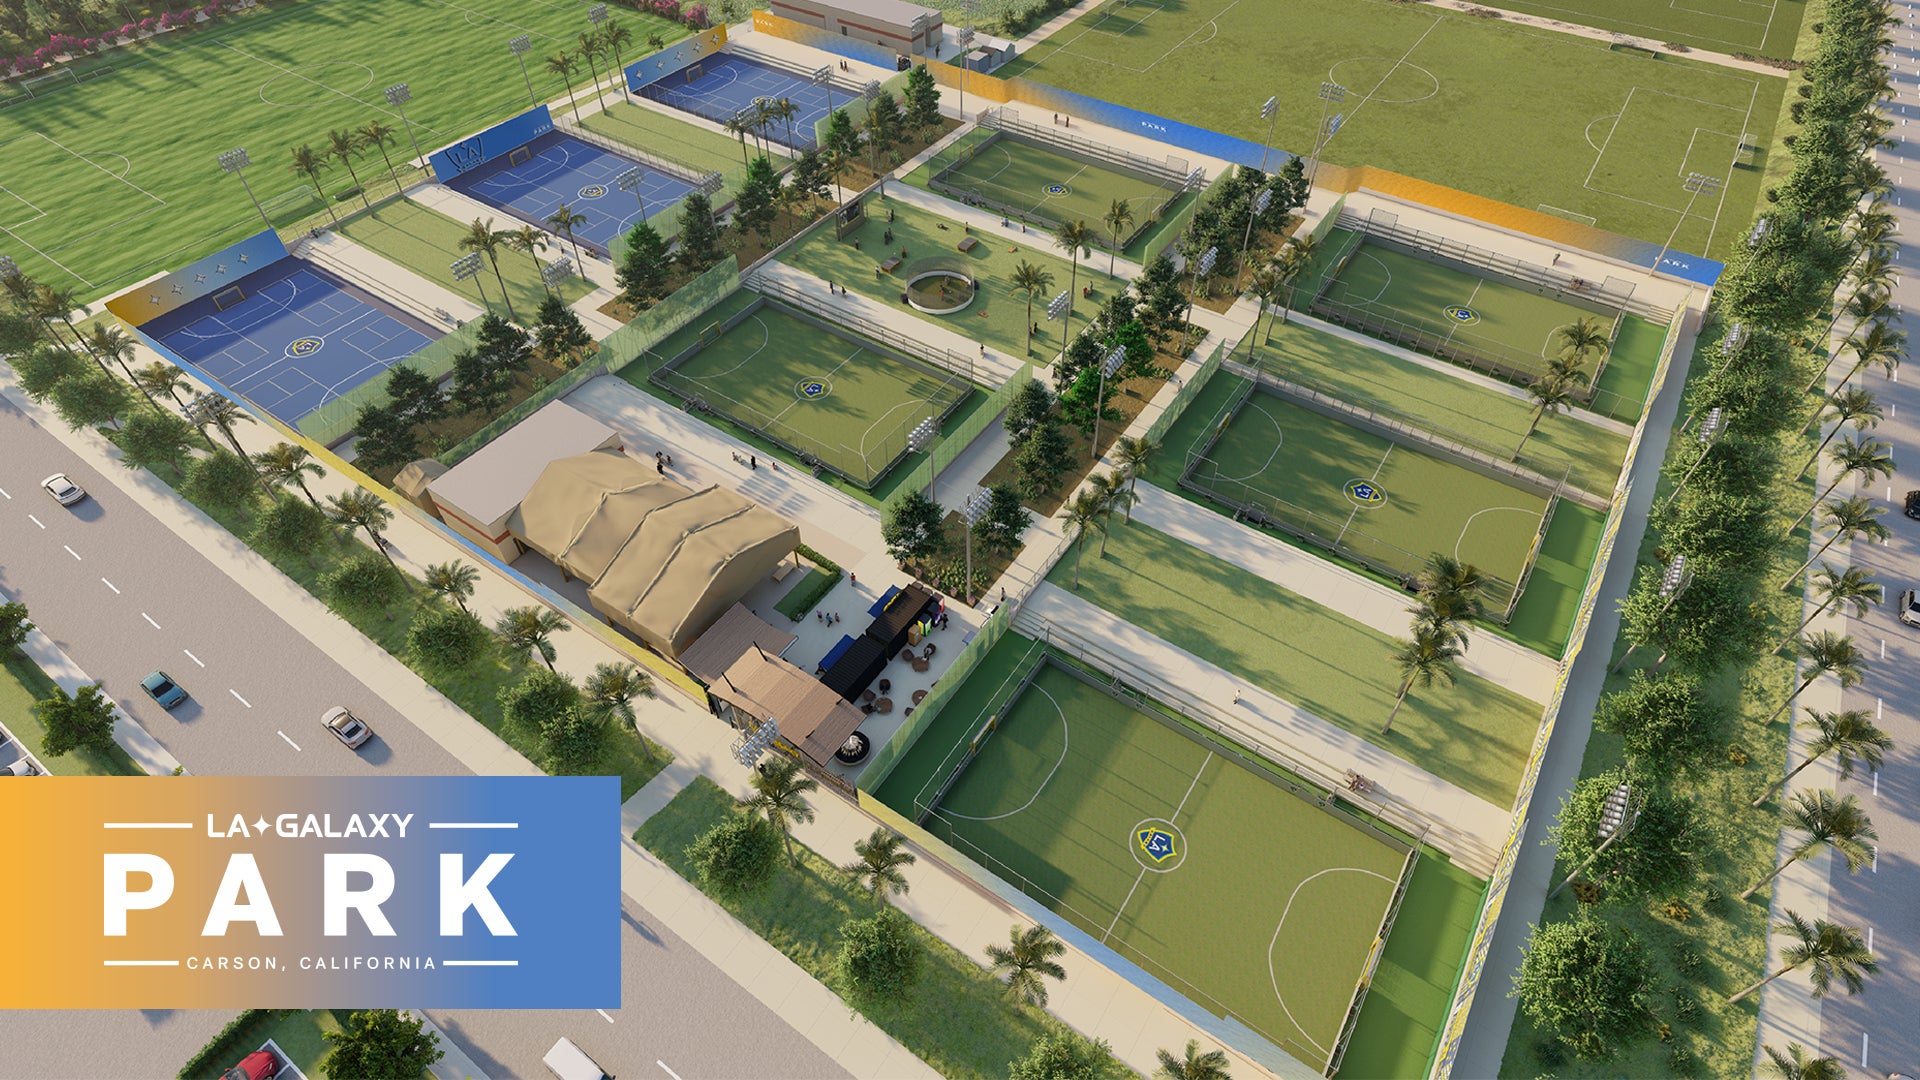 Dignity Health Sports Park and LA Galaxy to Launch Galaxy Park in March 2023 including Futsal Courts, 5v5 Soccer Fields, Pickleball Courts and Padel Courts  